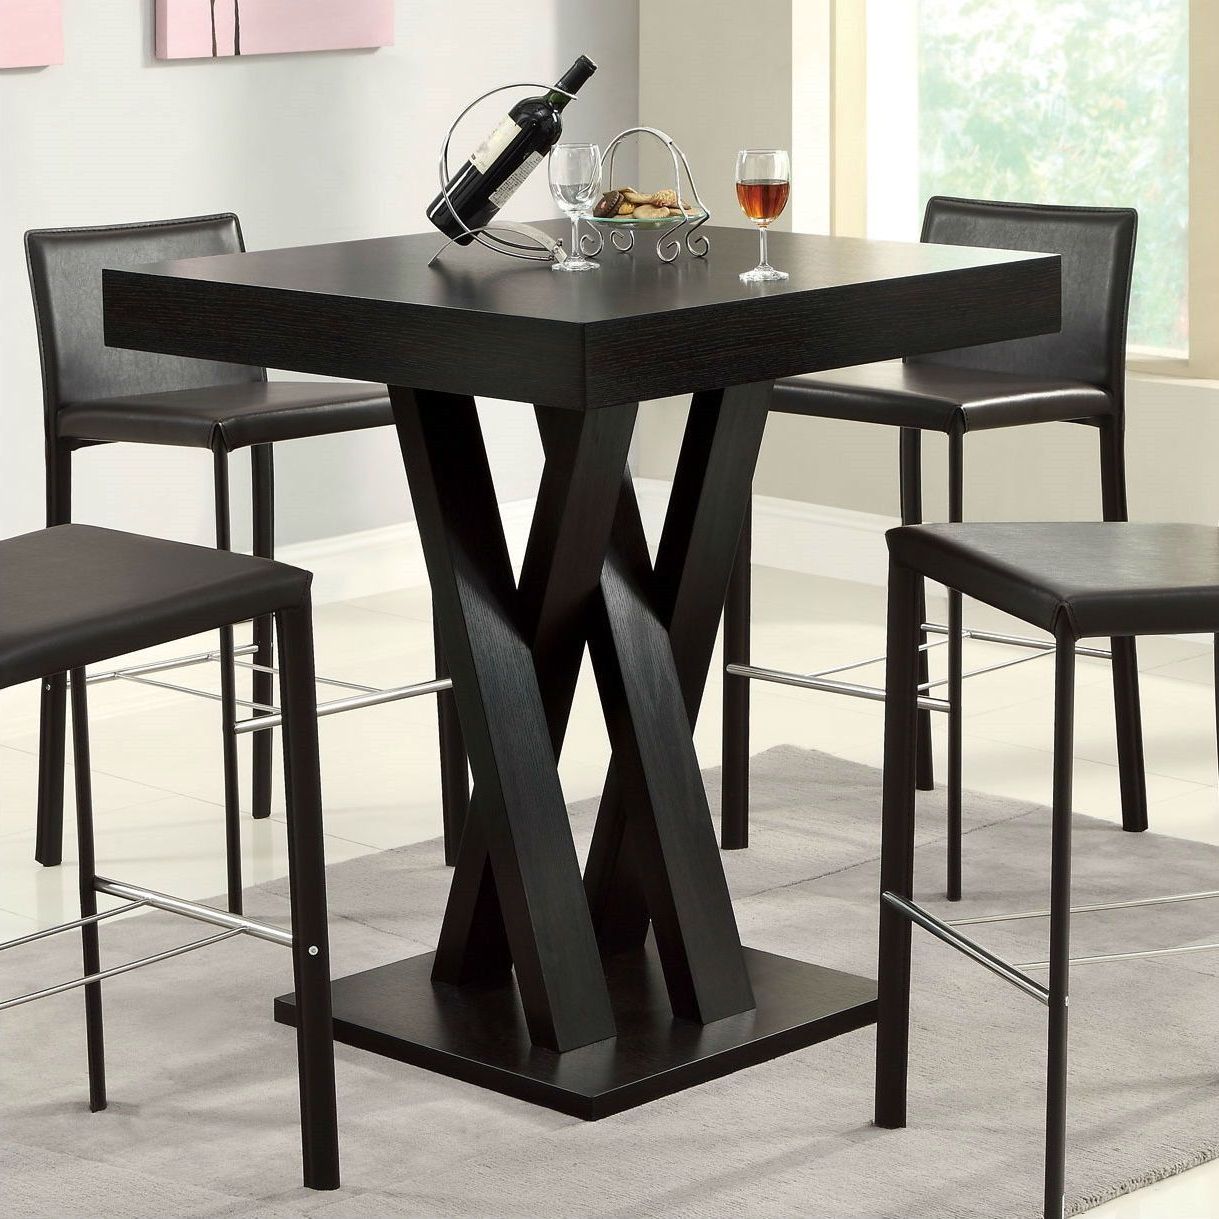 Chrome Contemporary Square Casual Dining Tables With Regard To Most Recently Released Modern 40 Inch High Square Dining Table In Dark Cappuccino (View 4 of 30)